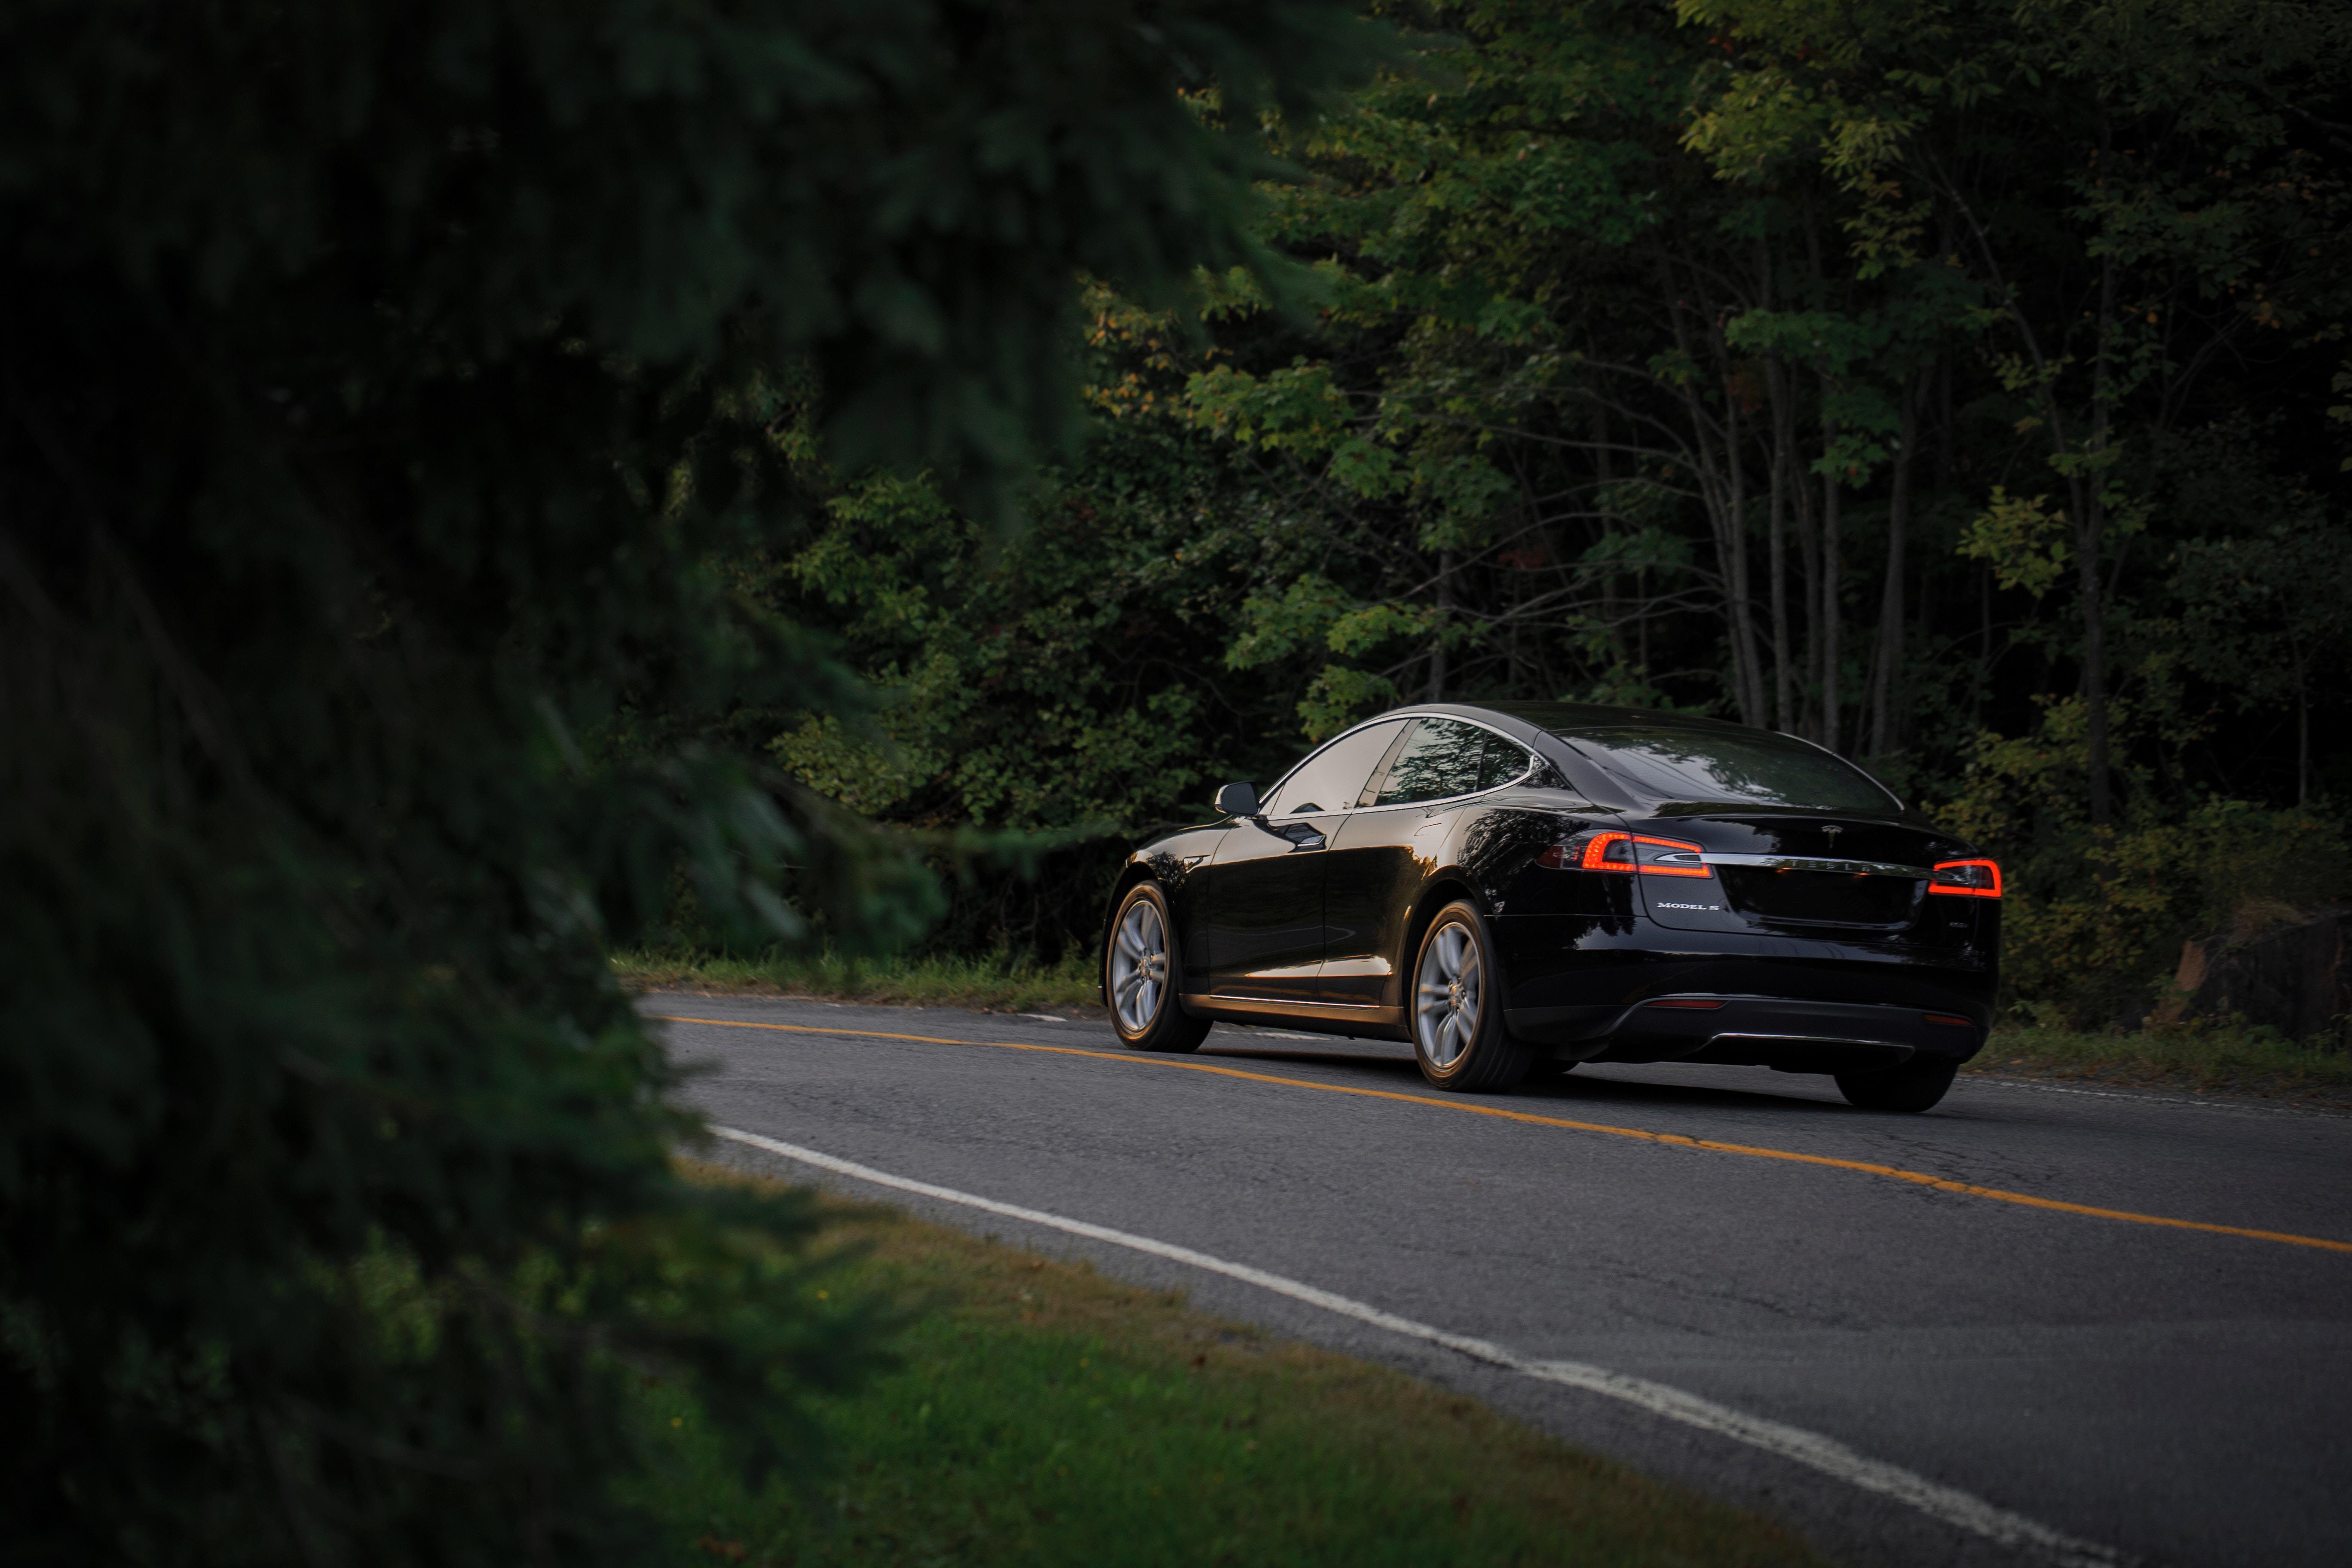 Download 5472x3648 Tesla Model S, Road, Trees, Electric Cars